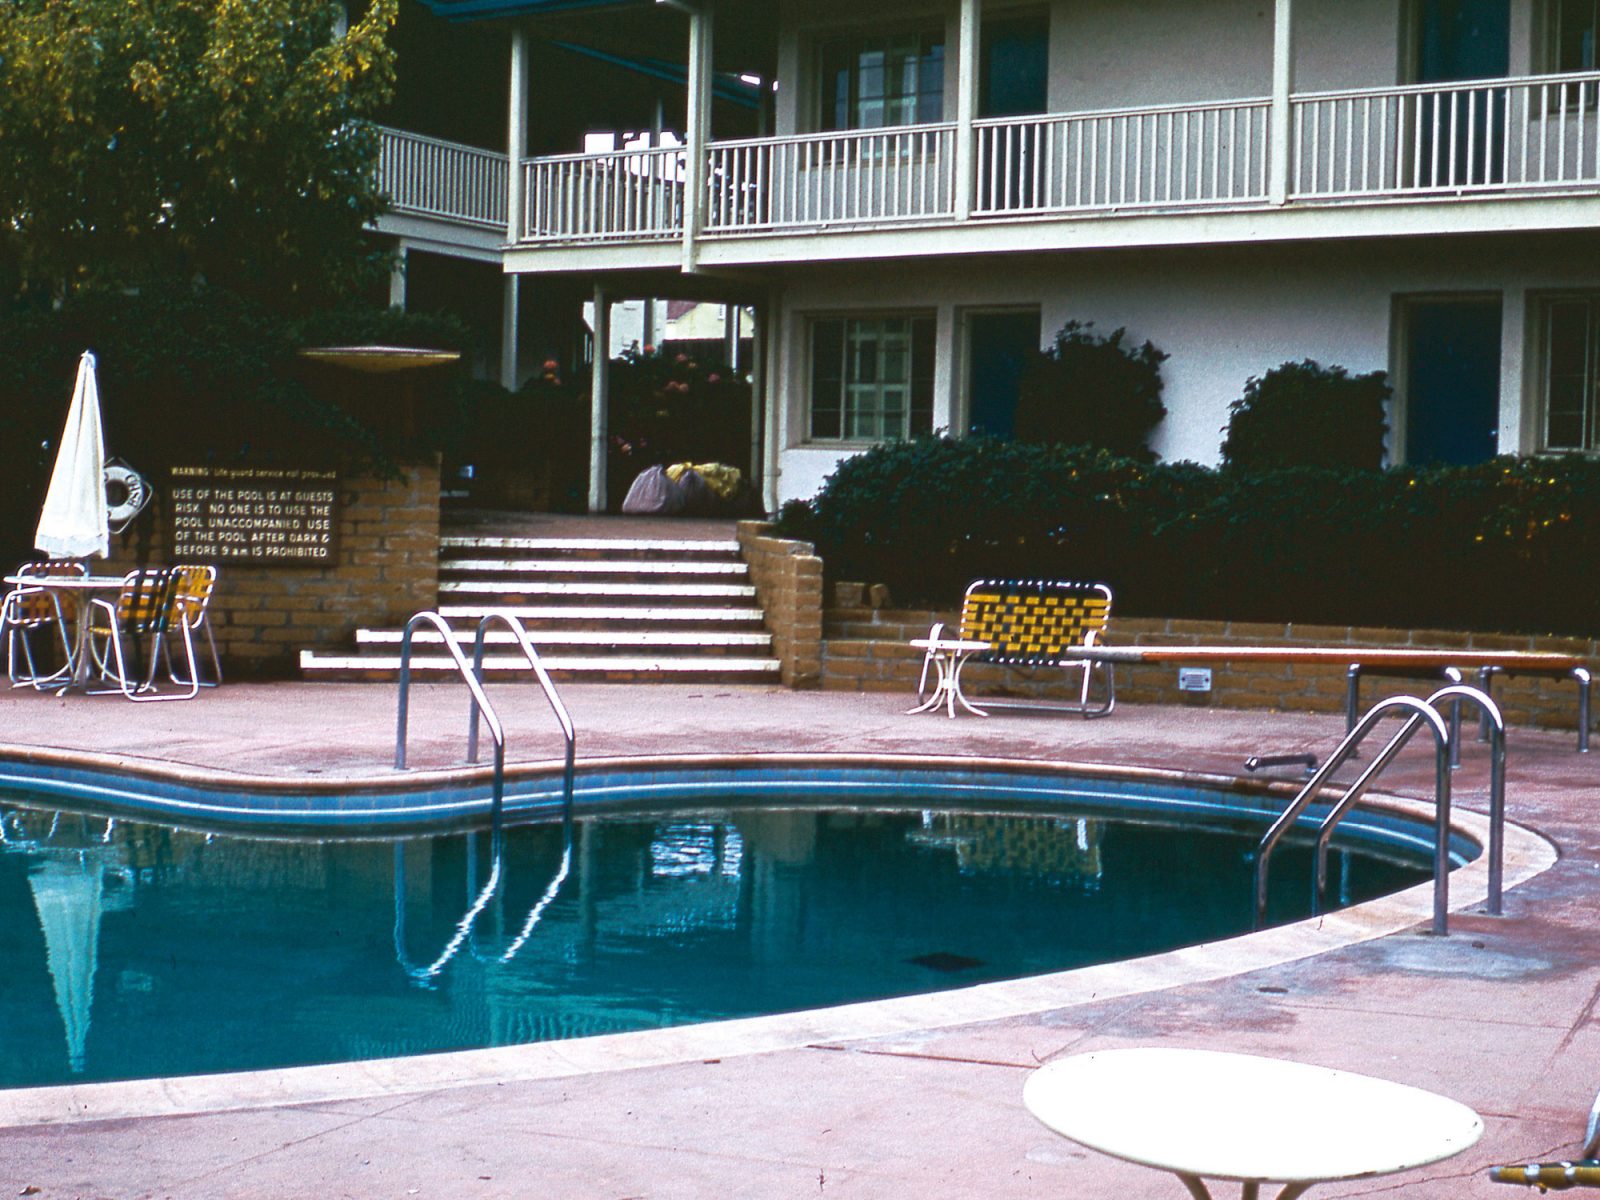 Pool area with kidney-shaped blue pool and 1950s-style sun loungers.